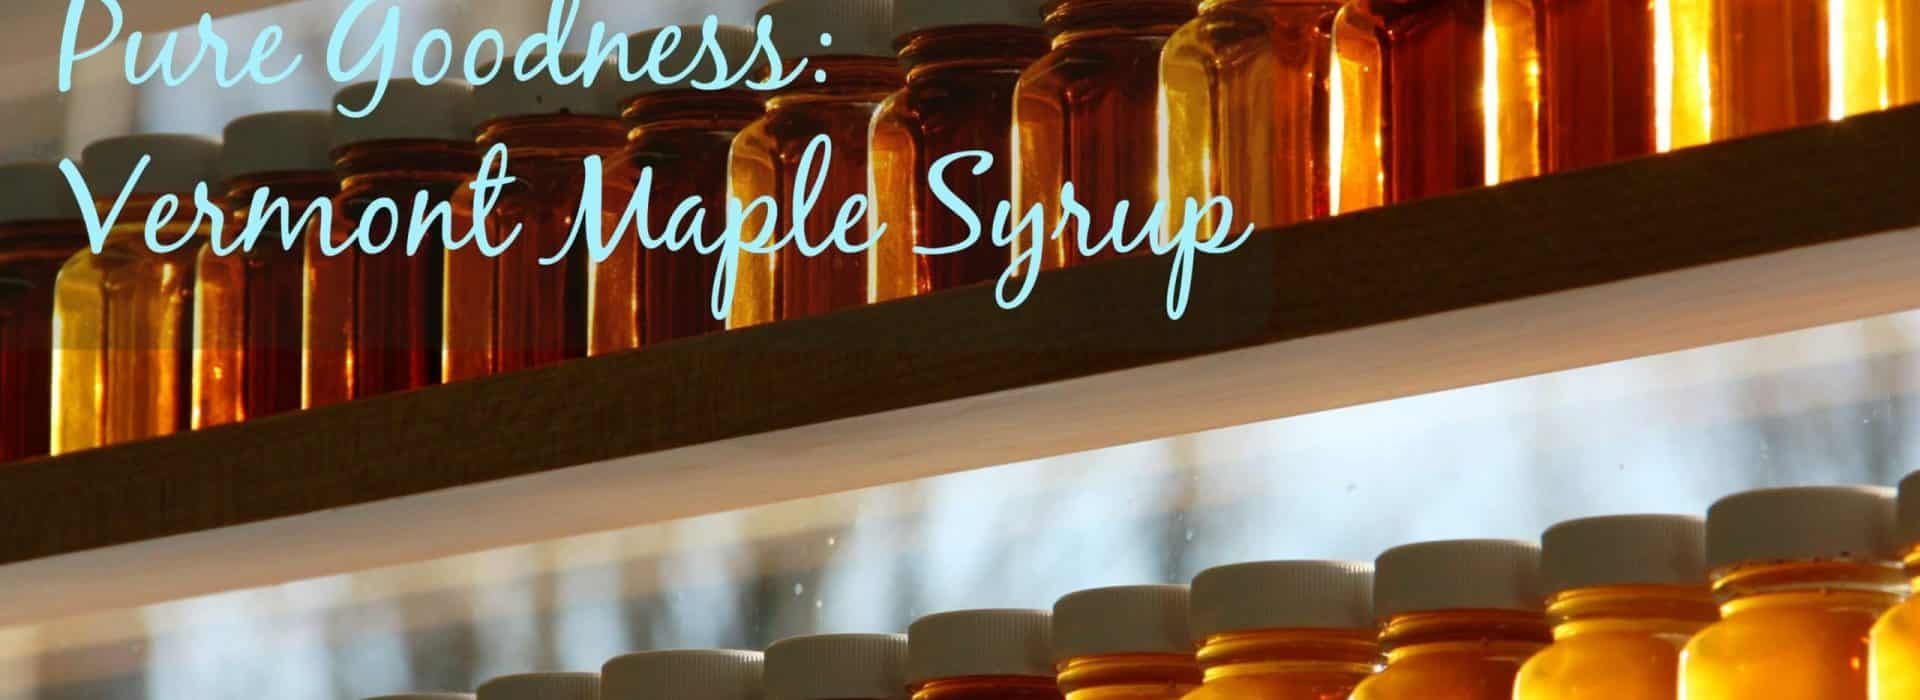 two shelves filled with small bottles of varied grades and colors of Vermont maple syrup